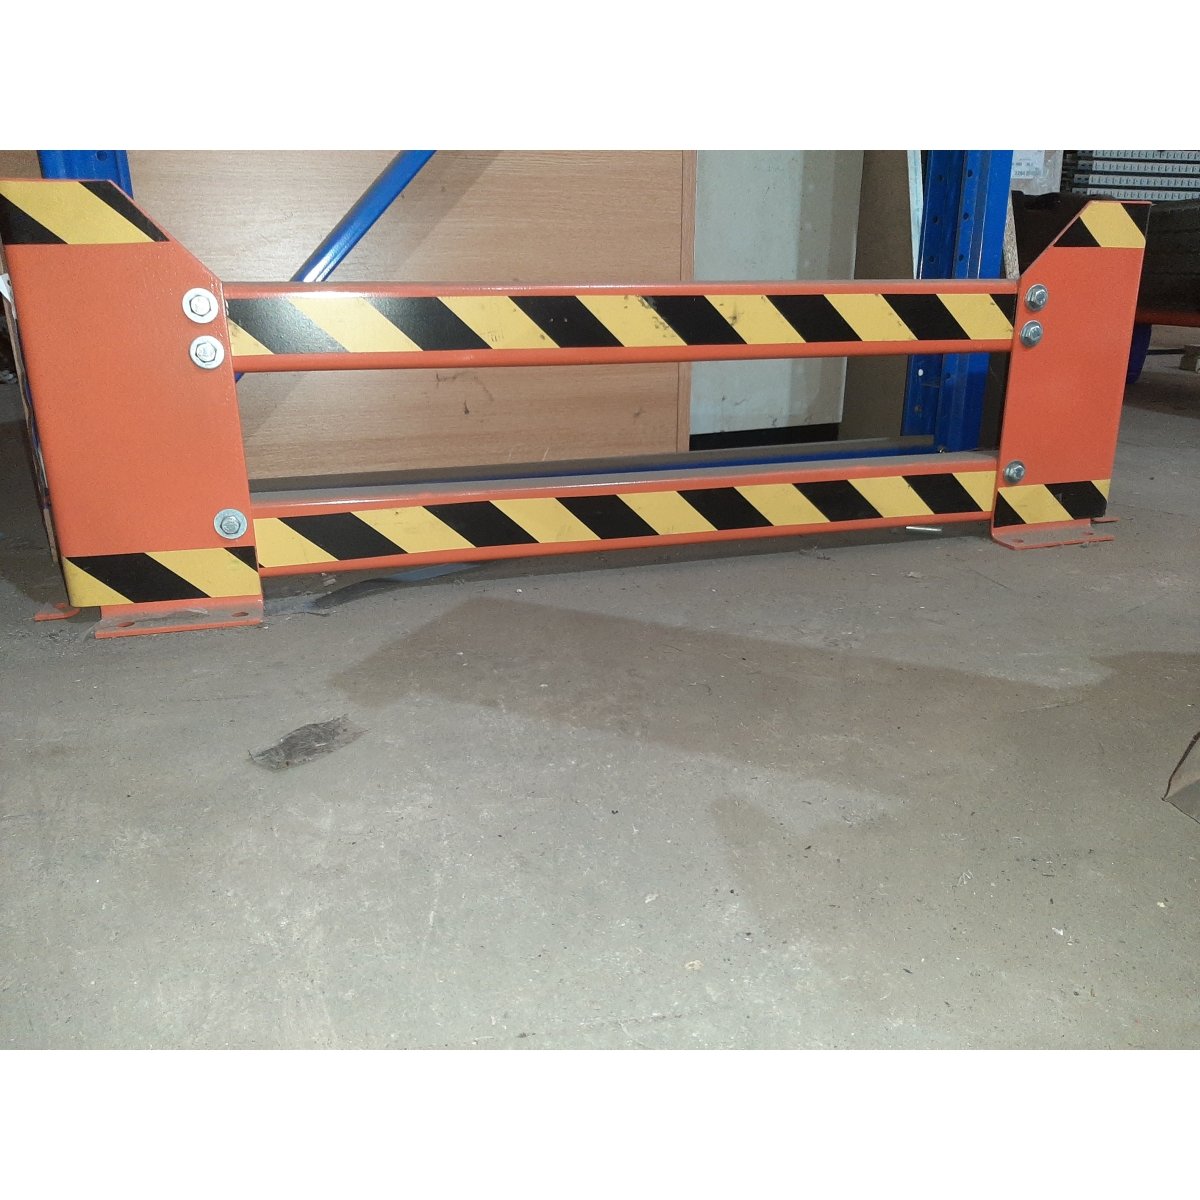 Pallet Racking Safety Protection Barrier Including Corner Guards - Warehouse Storage Products